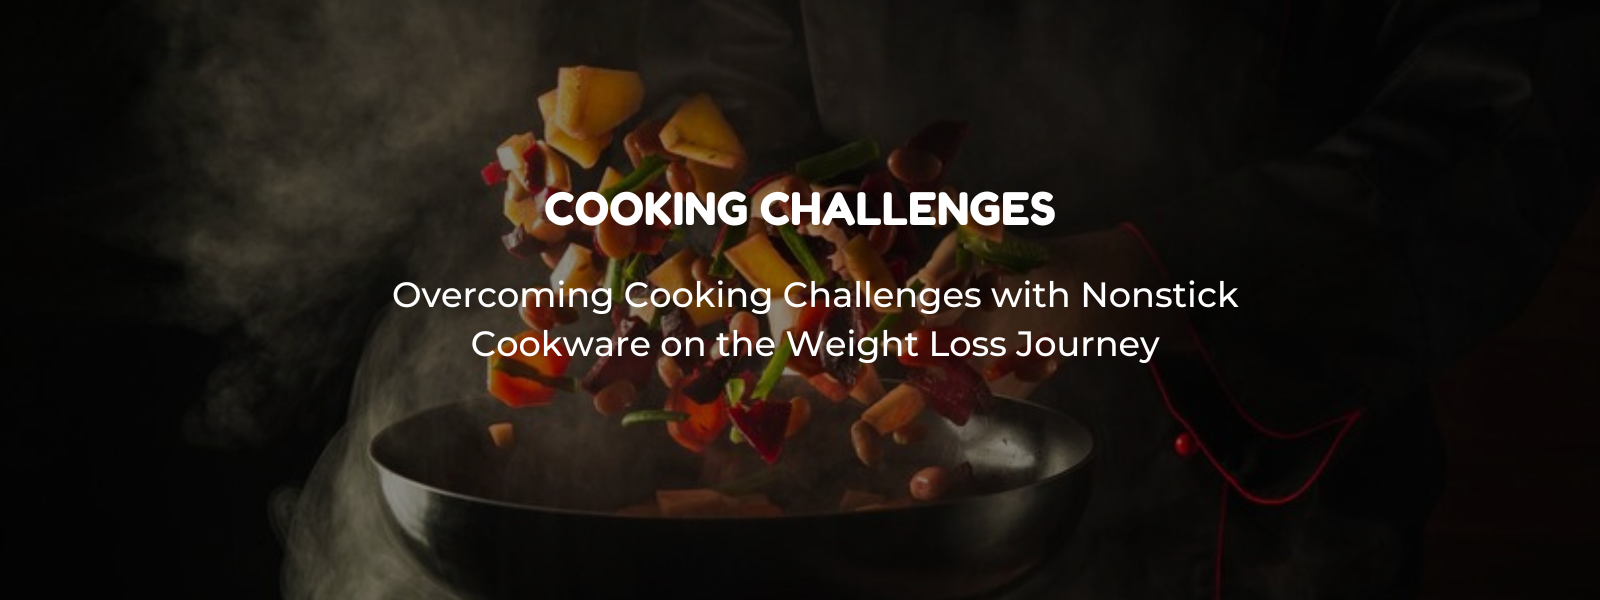 Overcoming Cooking Challenges with Nonstick Cookware on the Weight Loss Journey